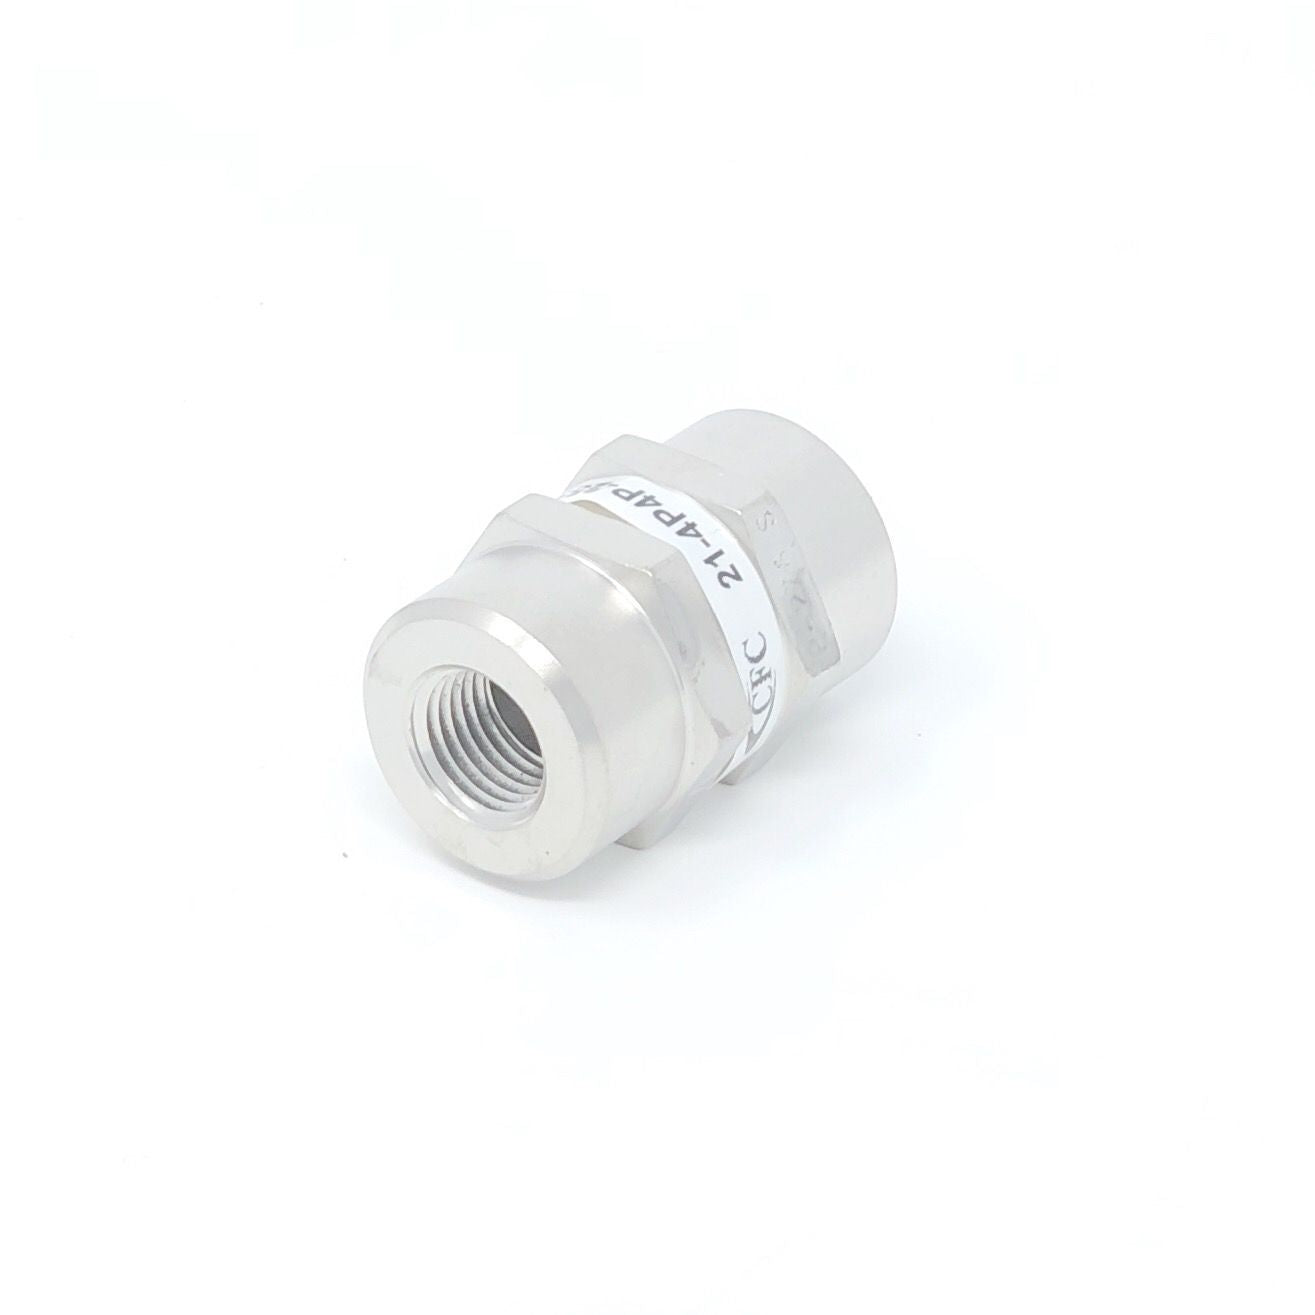 21-12T12T-100S : Chase High Pressure Inline Filter, 3000psi, 3/4" 37 Degree Flare , 100 Micron, No Visual Indicator, With Bypass